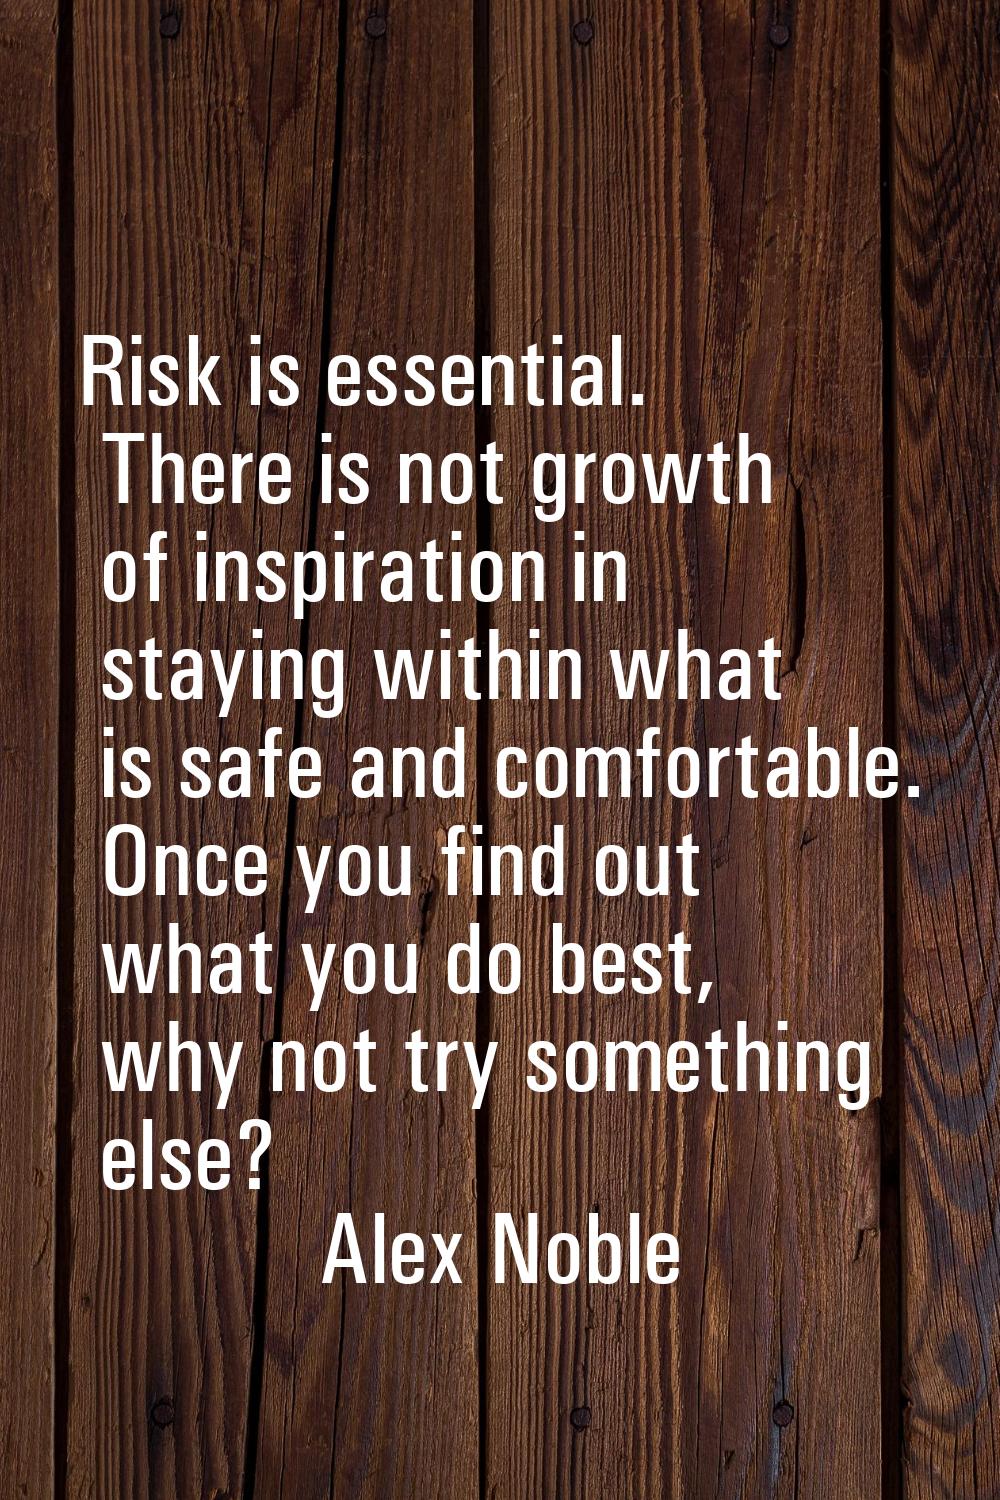 Risk is essential. There is not growth of inspiration in staying within what is safe and comfortabl